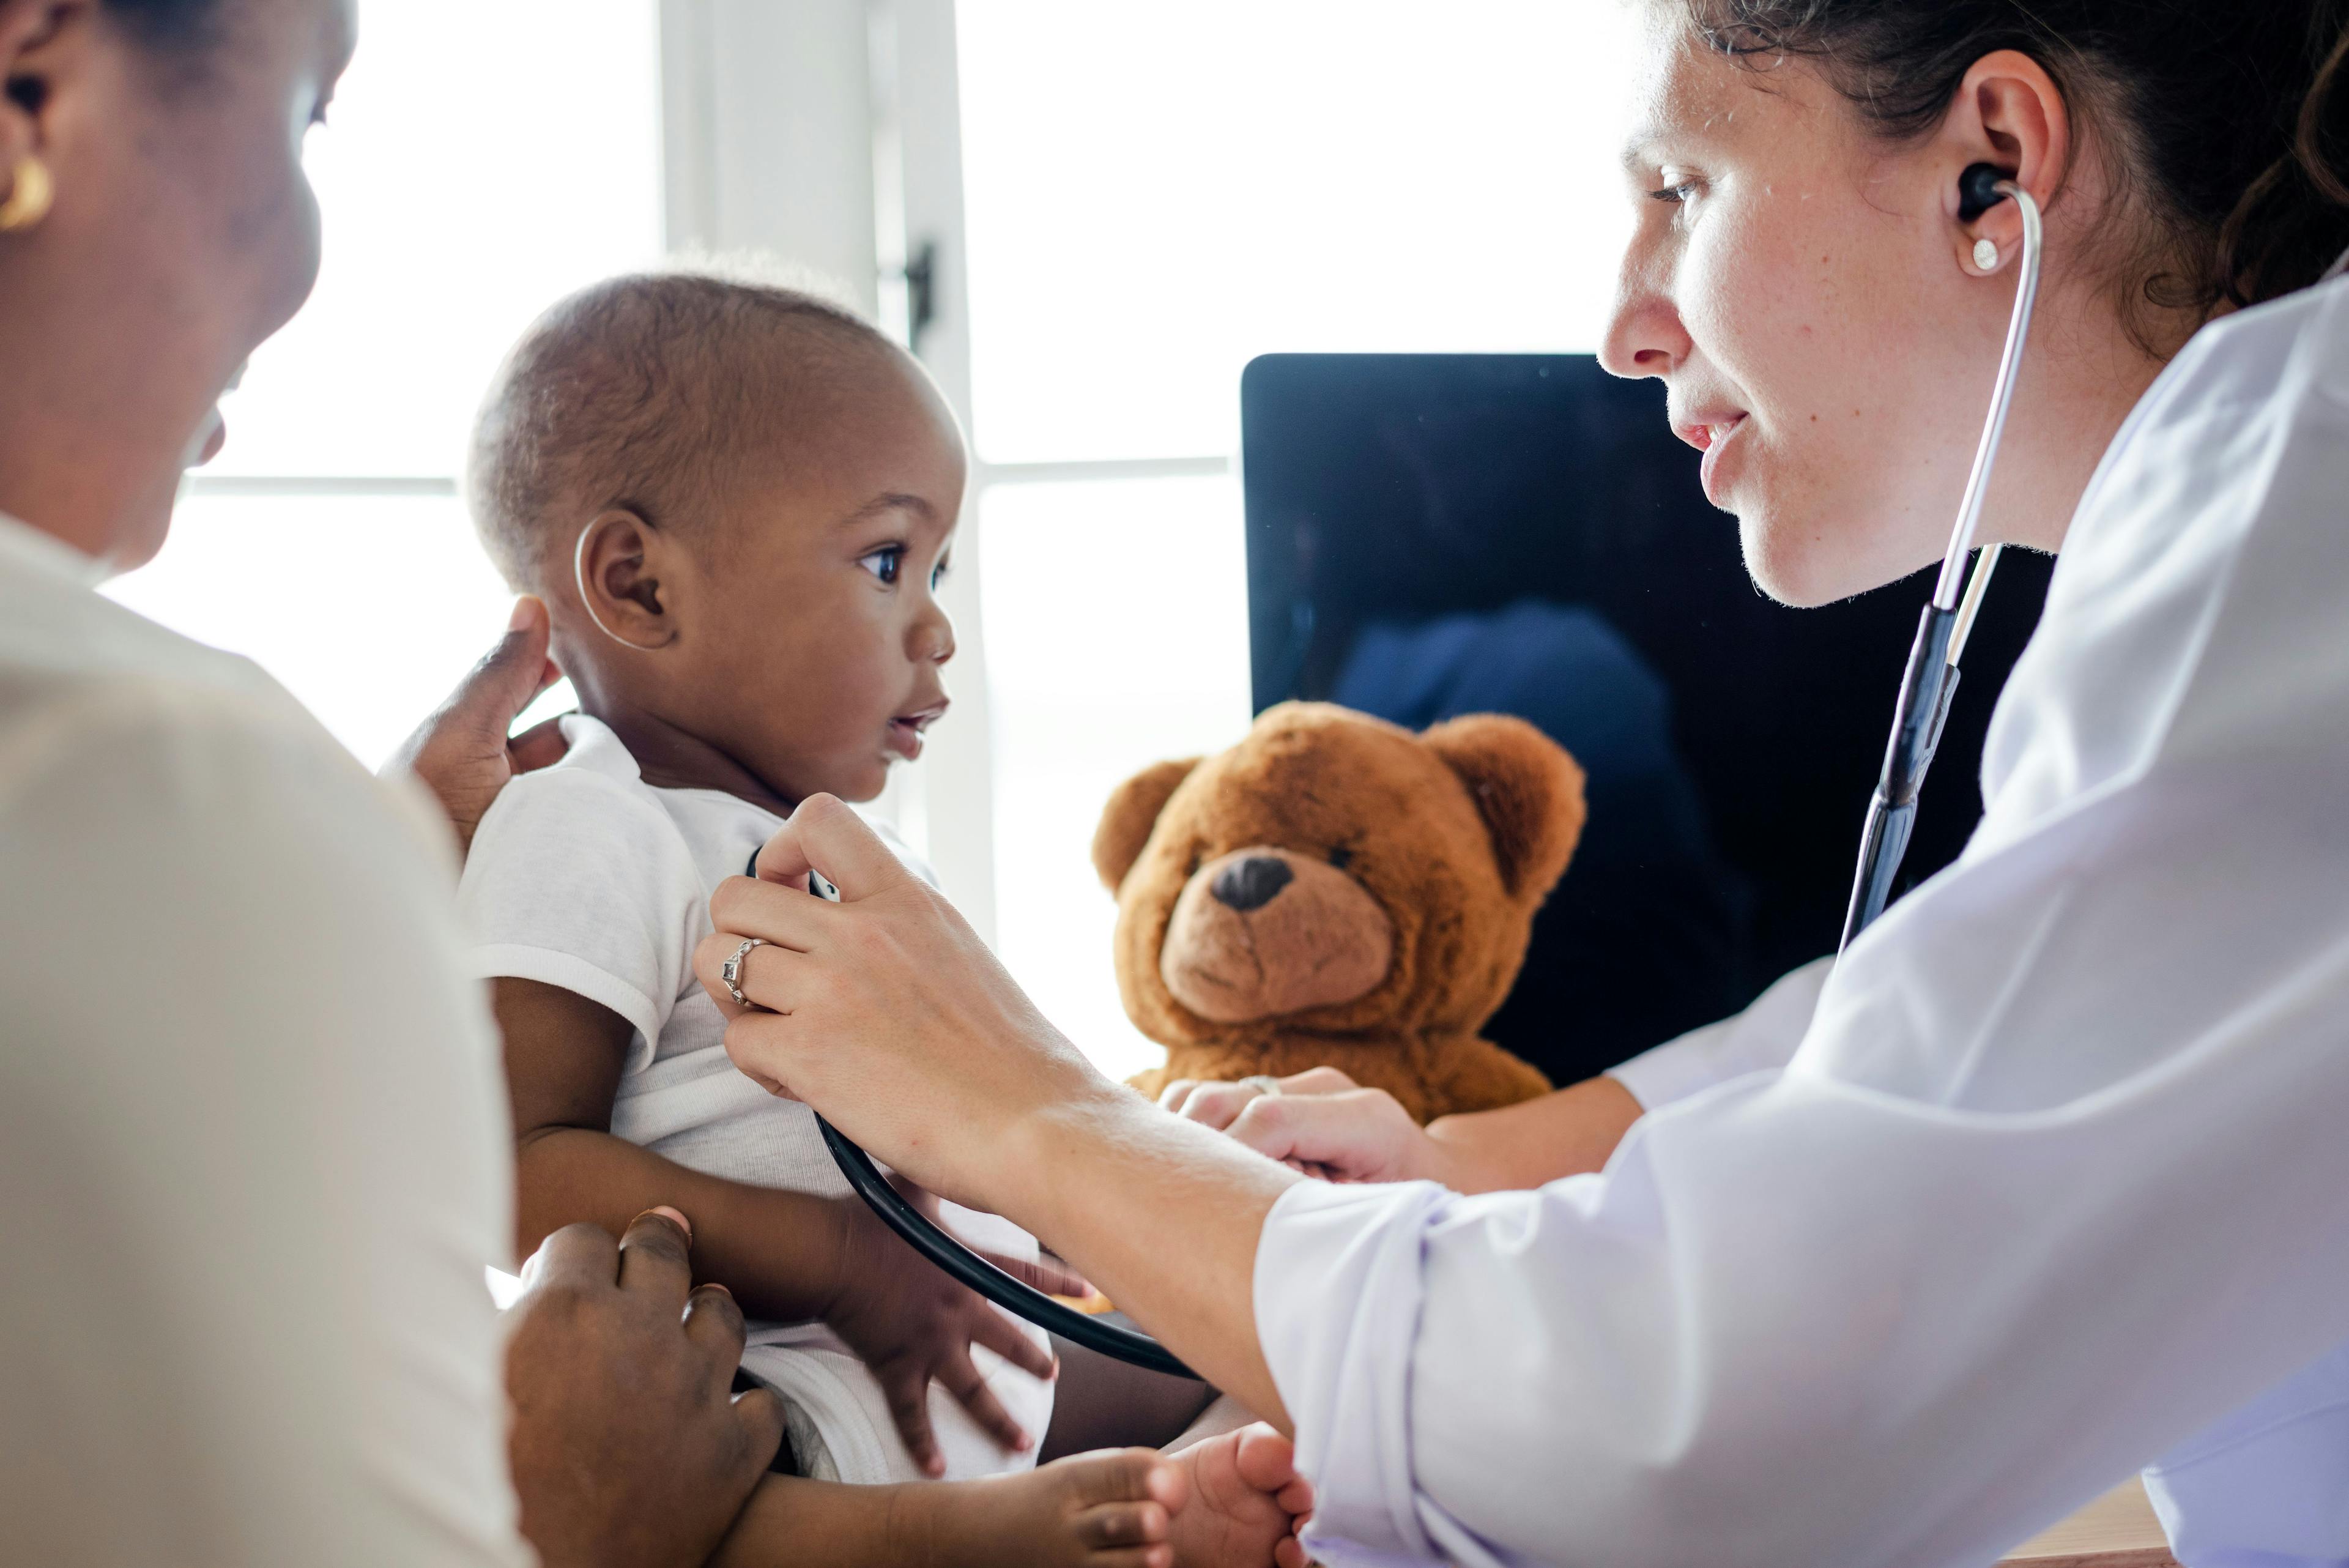 Baby visiting the doctor for a checkup | Image Credit: Rawpixel.com - stock.adobe.com